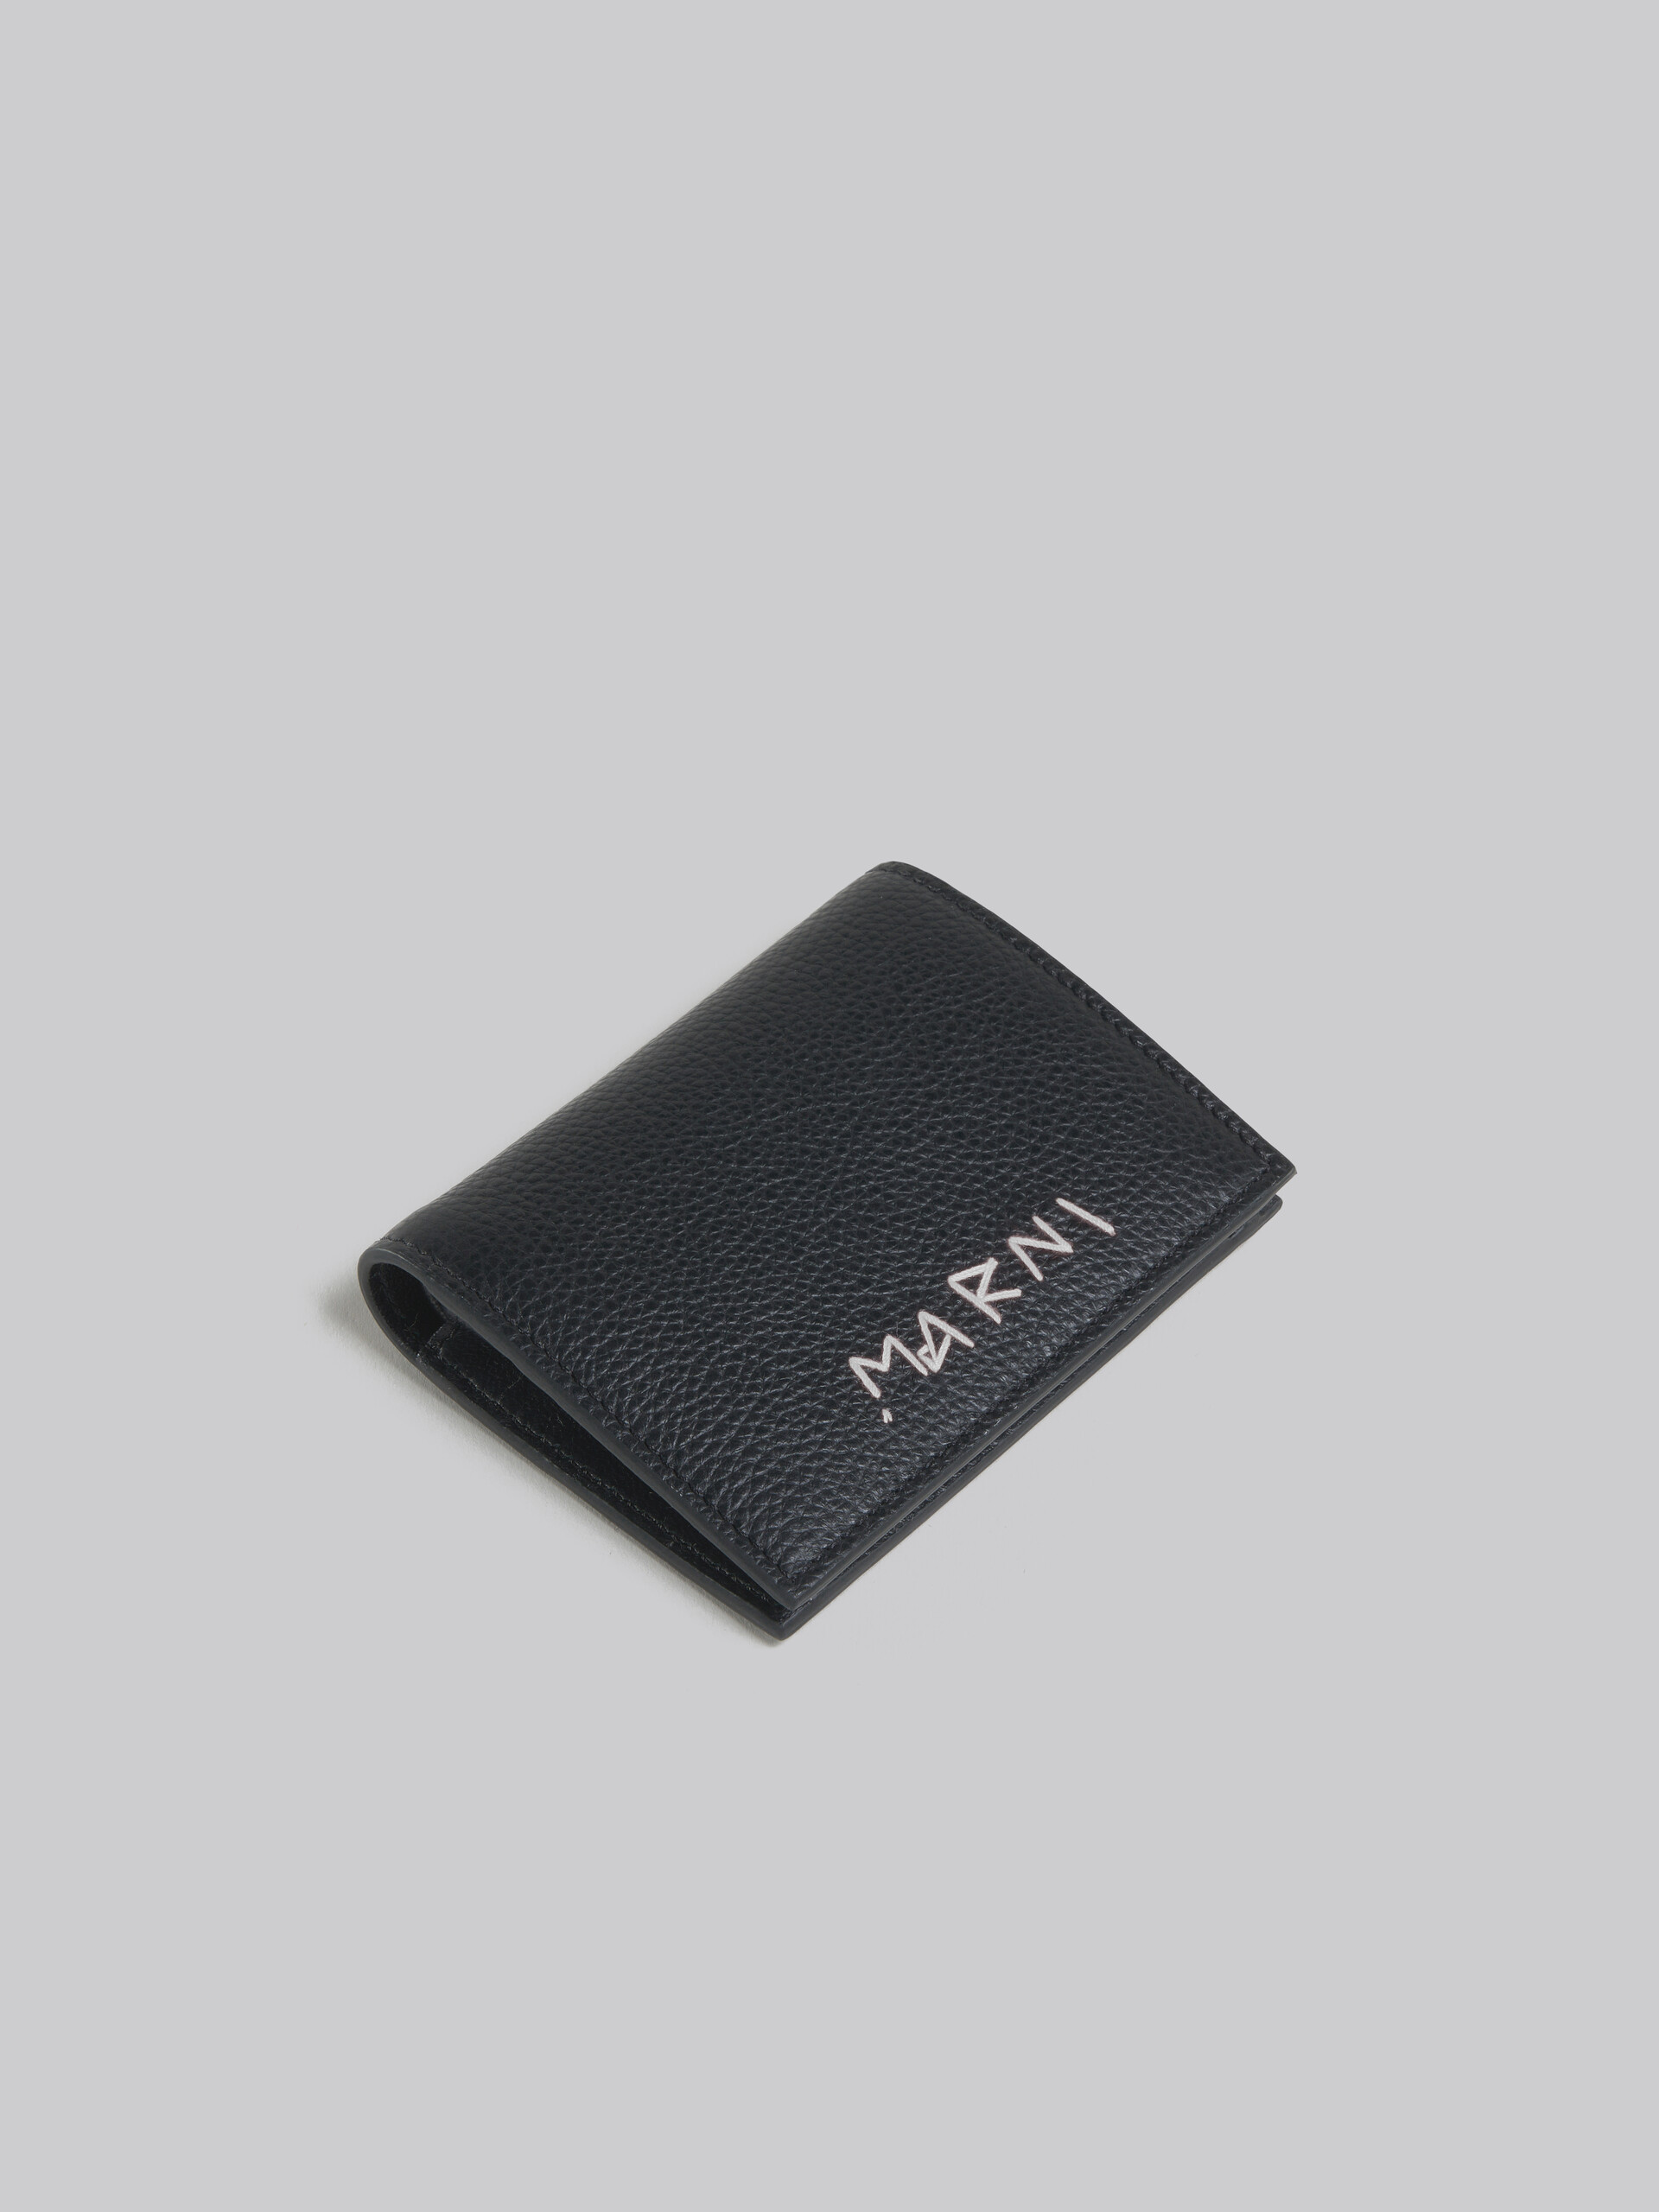 Blue leather bifold wallet with Marni mending - Wallets - Image 5